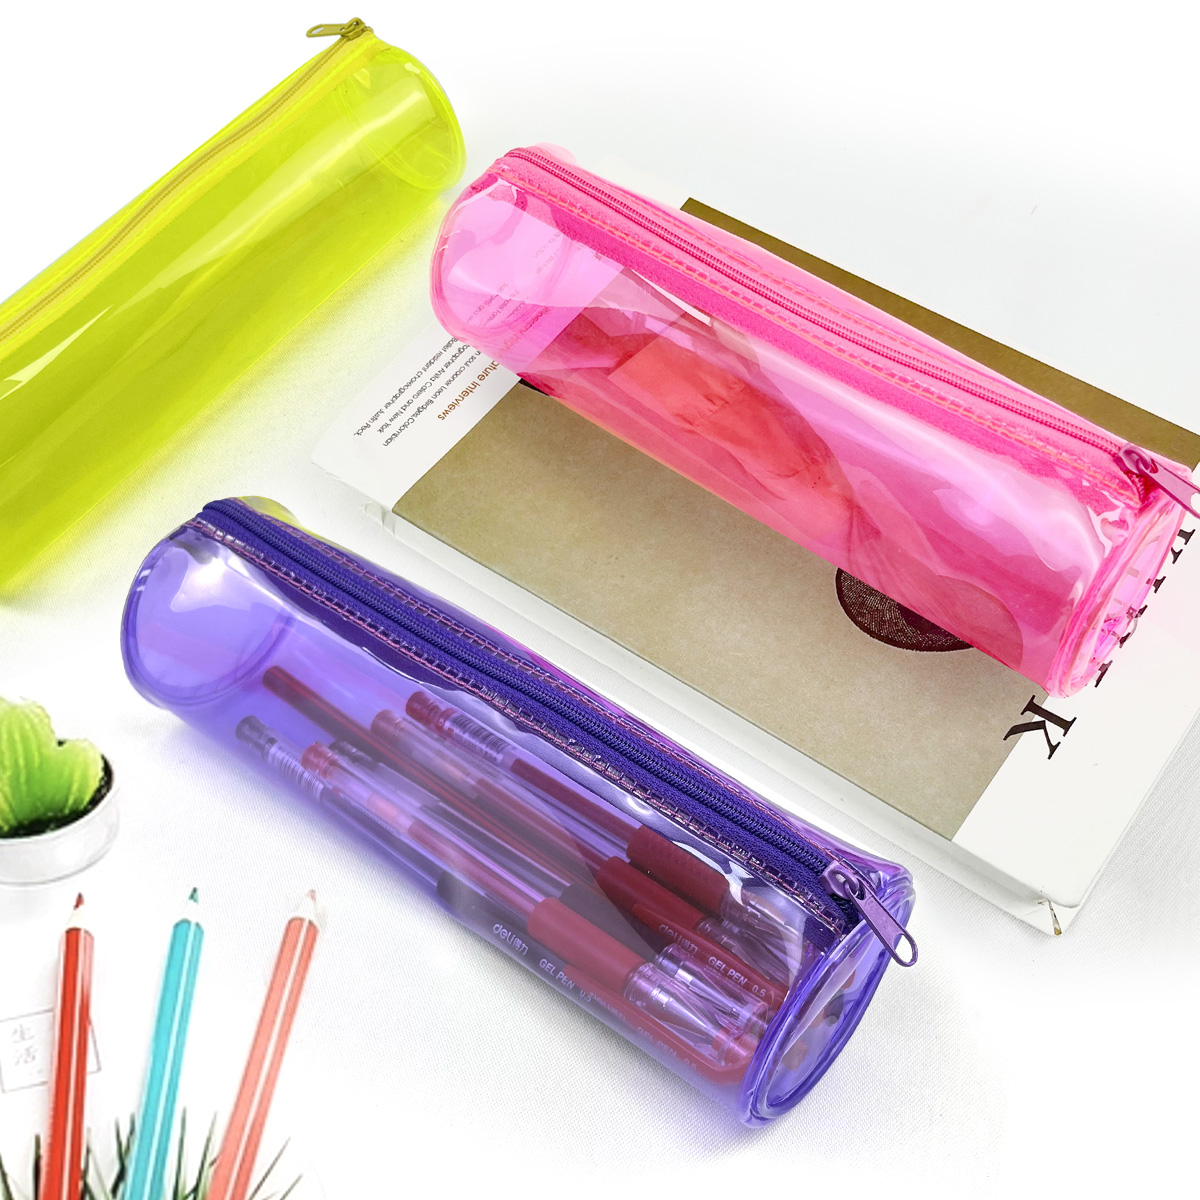 Cylinder shape transparent PVC pencil pouch pen case 4 colors available with zipper closure toiletry pouch great gift for kids teens adults for office school supplies daily use China OEM factory